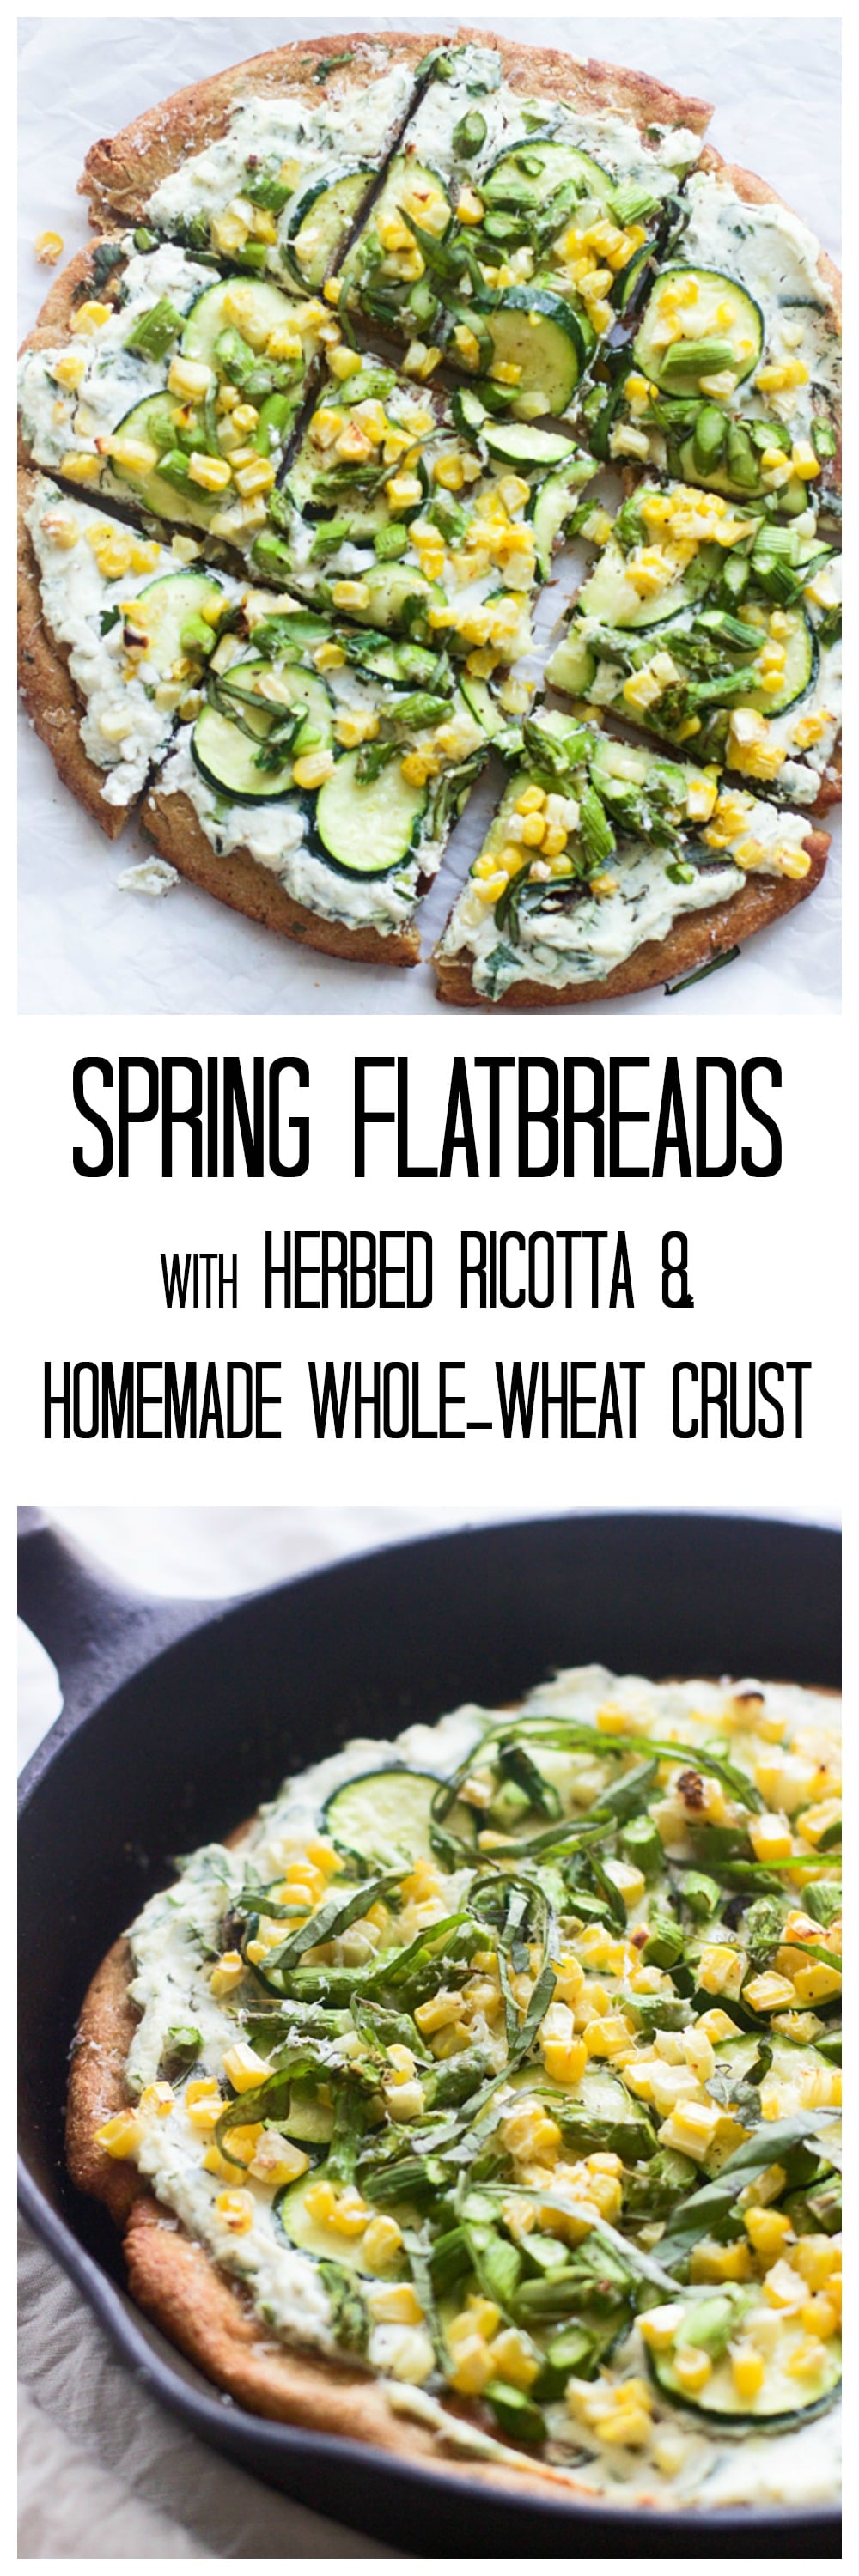 Spring Skillet Flatbreads with Herbed Ricotta and Homemade Whole-Wheat Crust